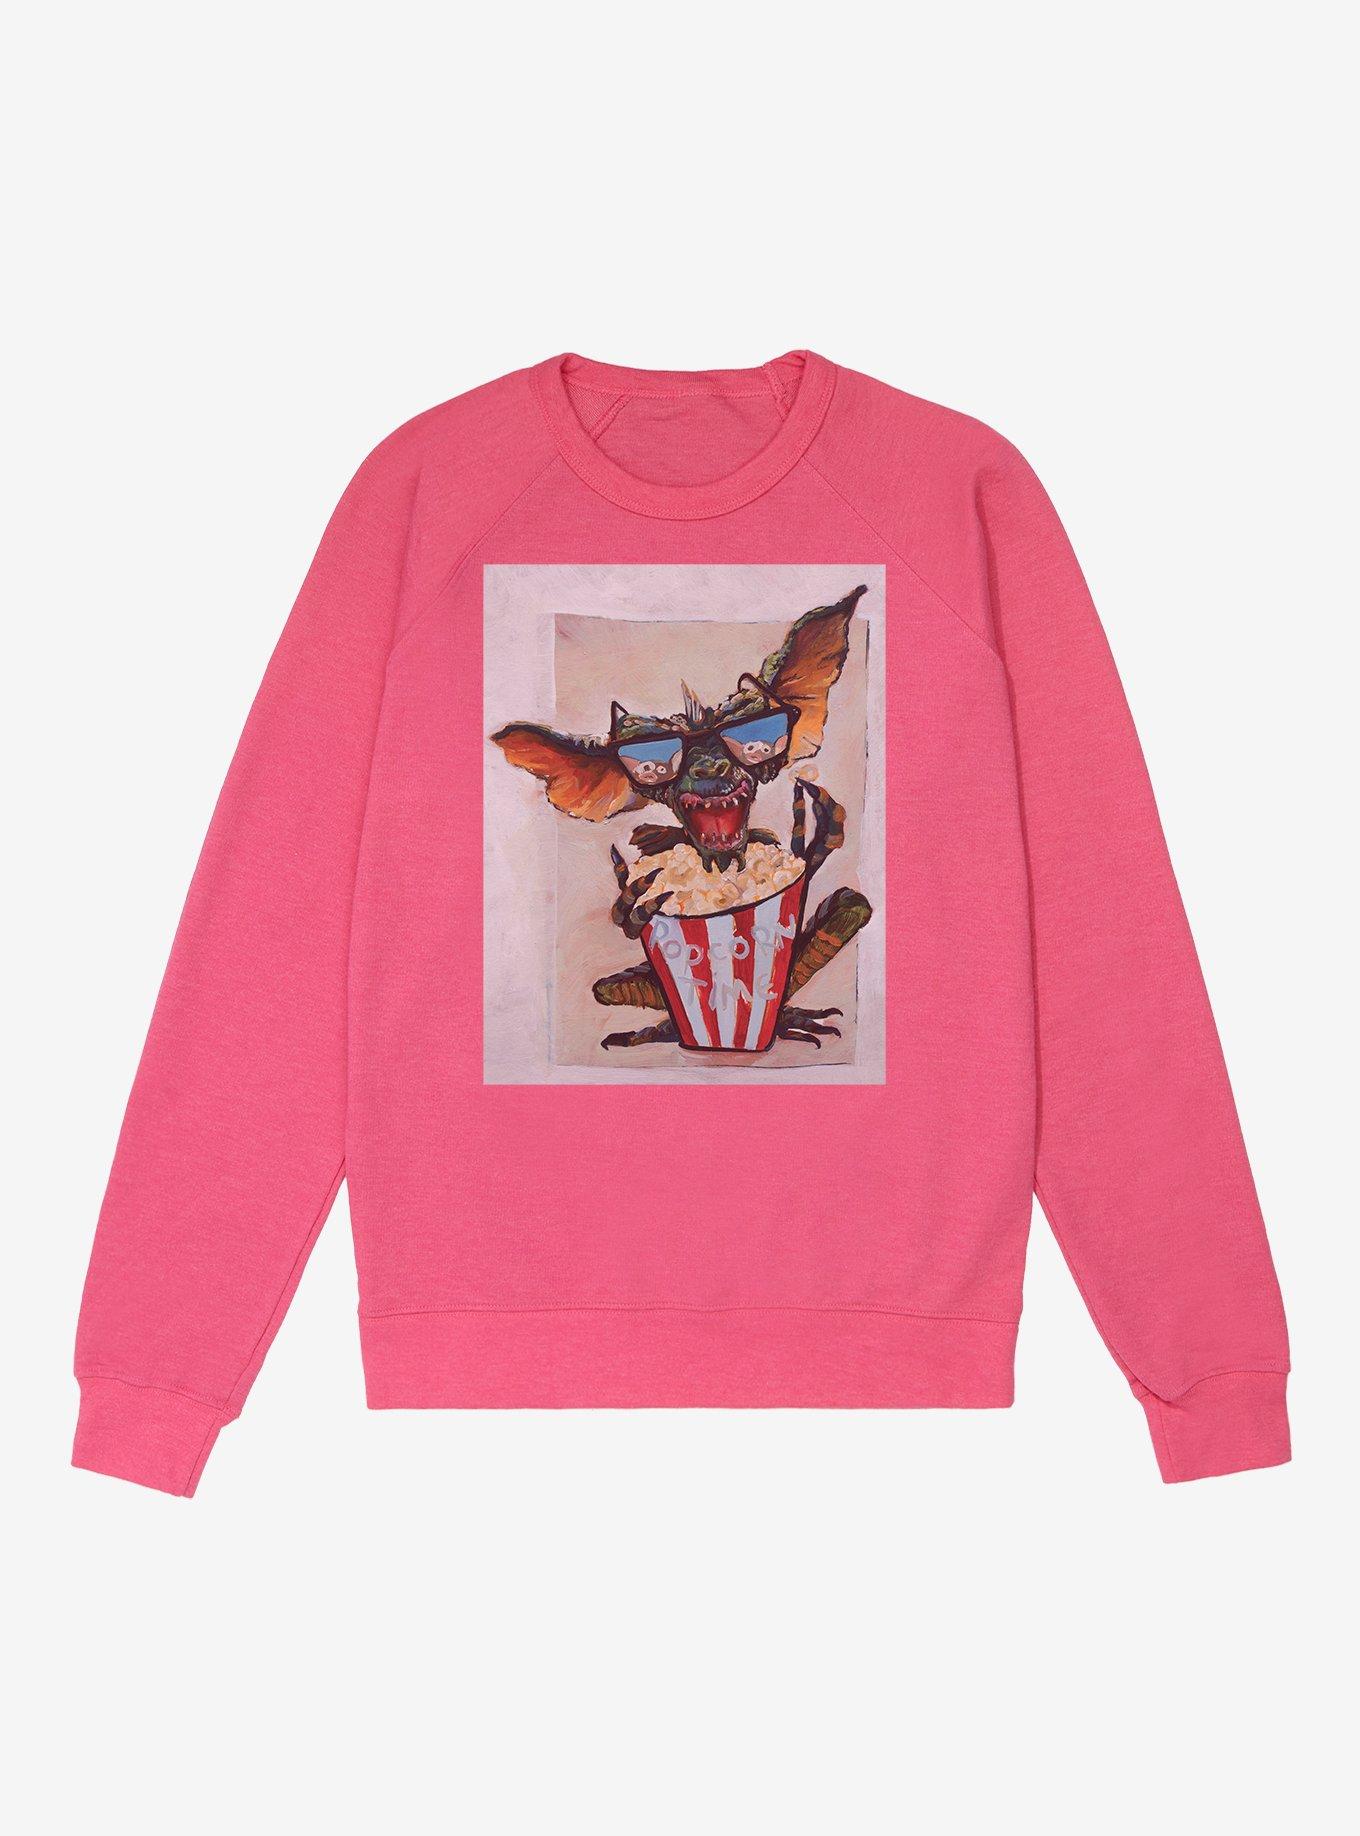 Gremlins Popcorn Time French Terry Sweatshirt, HELICONIA HEATHER, hi-res